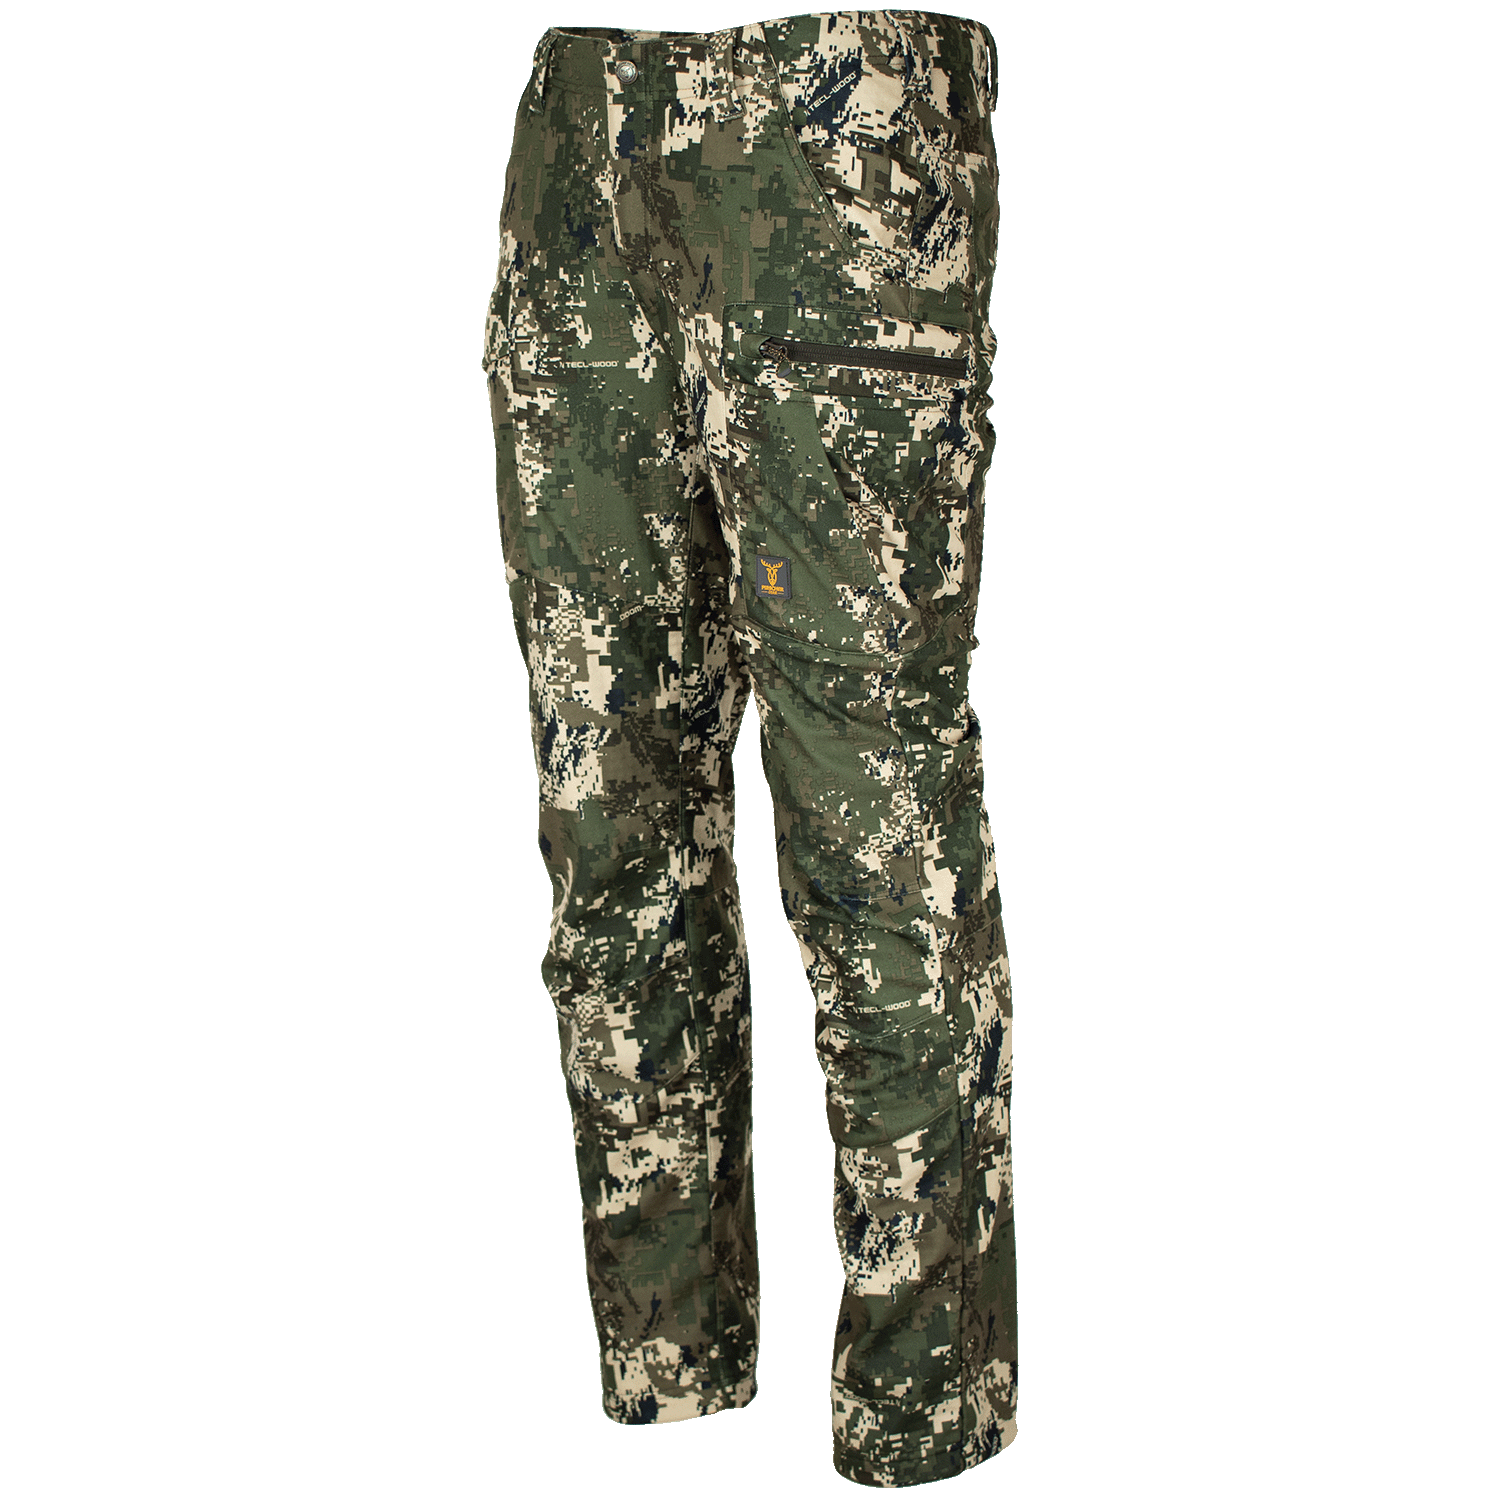 Pirscher Gear Silence Pro Pants (Optimax) - Camouflage Trousers